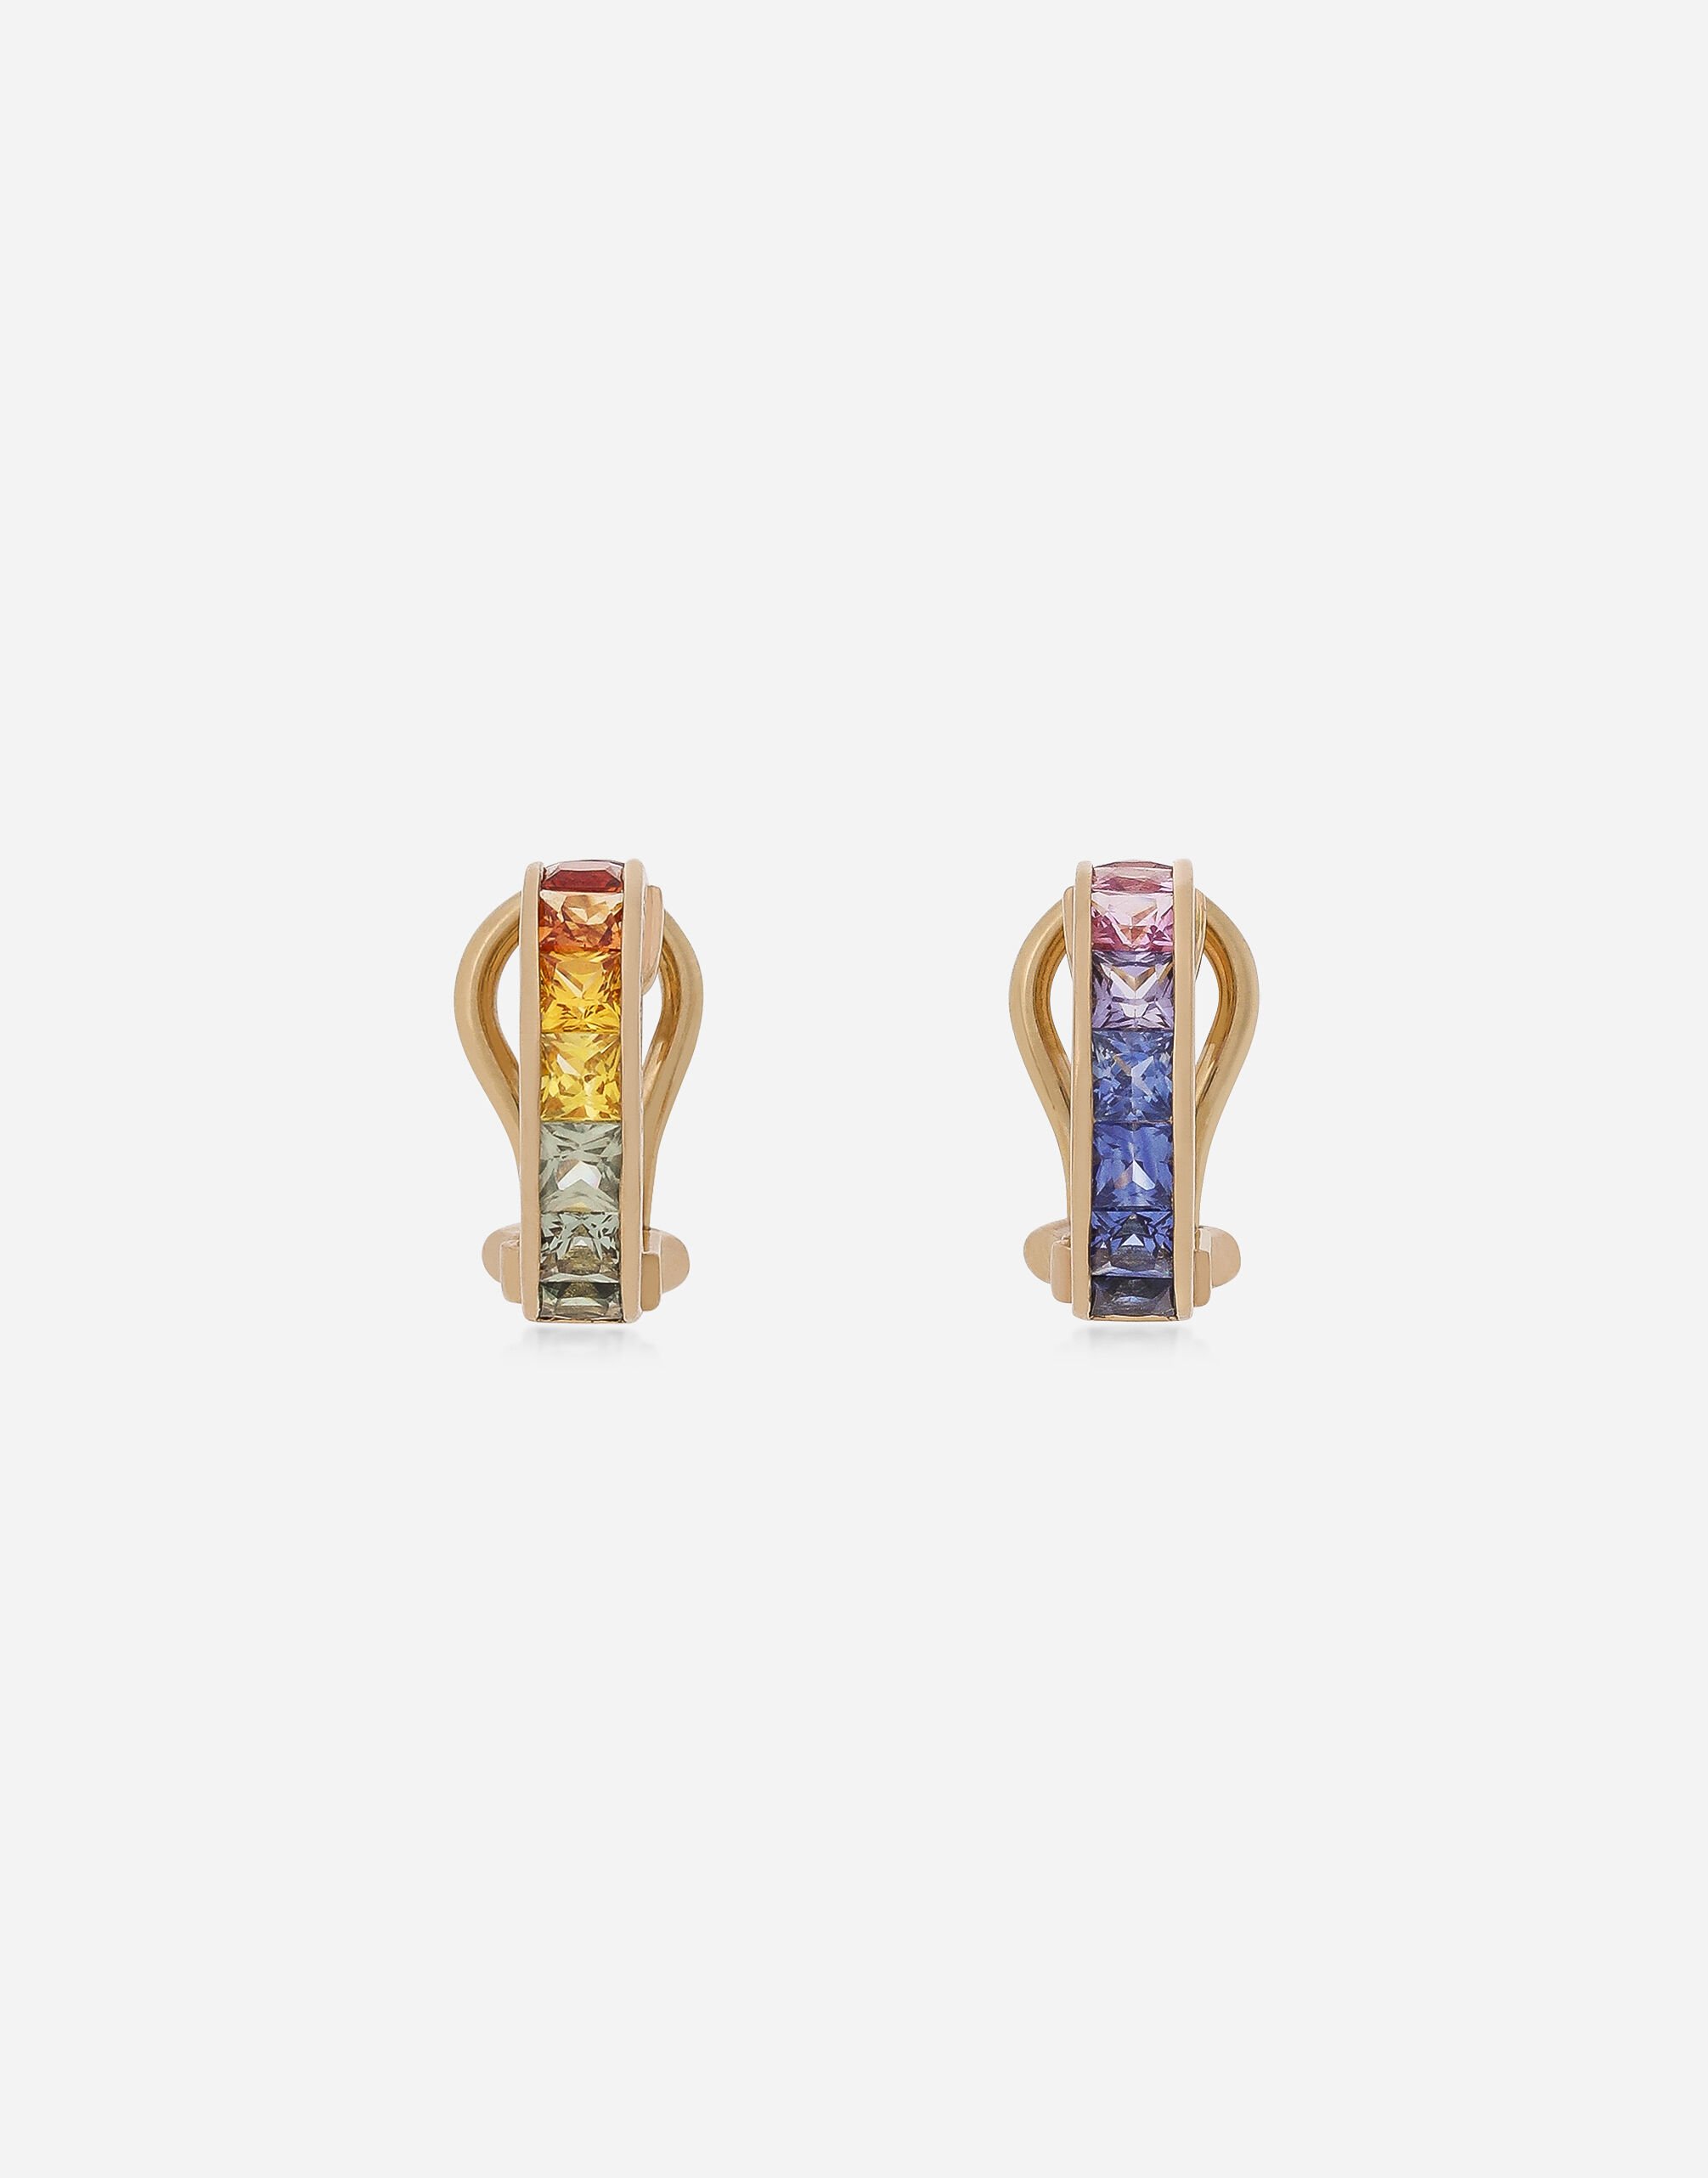 Dolce & Gabbana Rainbow earrings in yellow gold 18kt with multicolor sapphires and diamonds Red WSQB1GWQM01